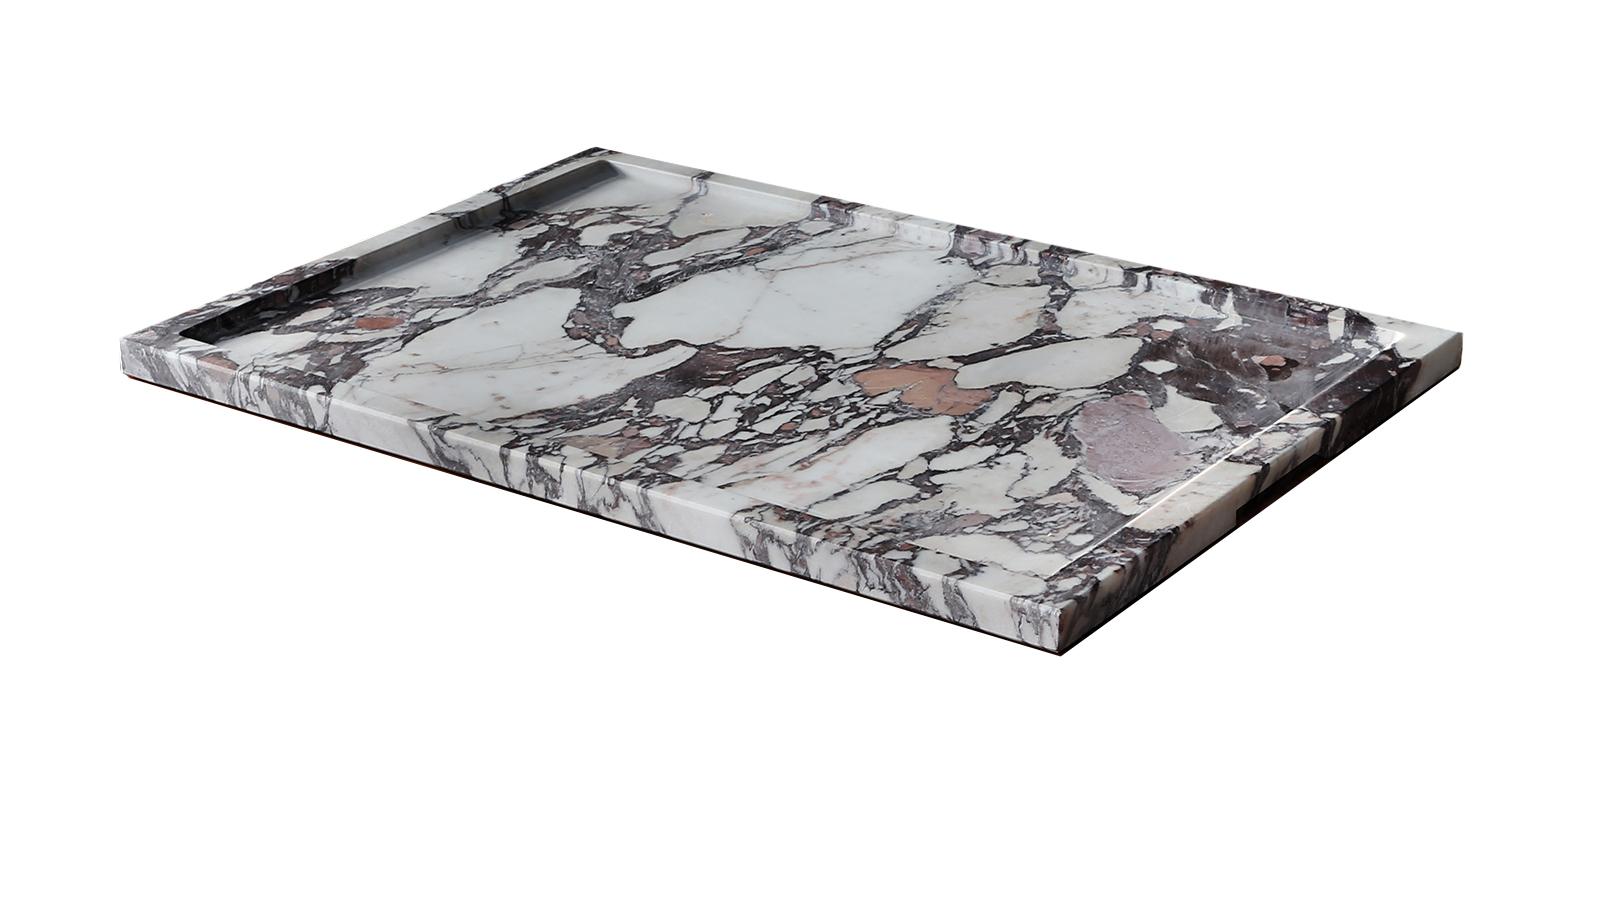 Trayano, the handmade tray in precious marble For Sale